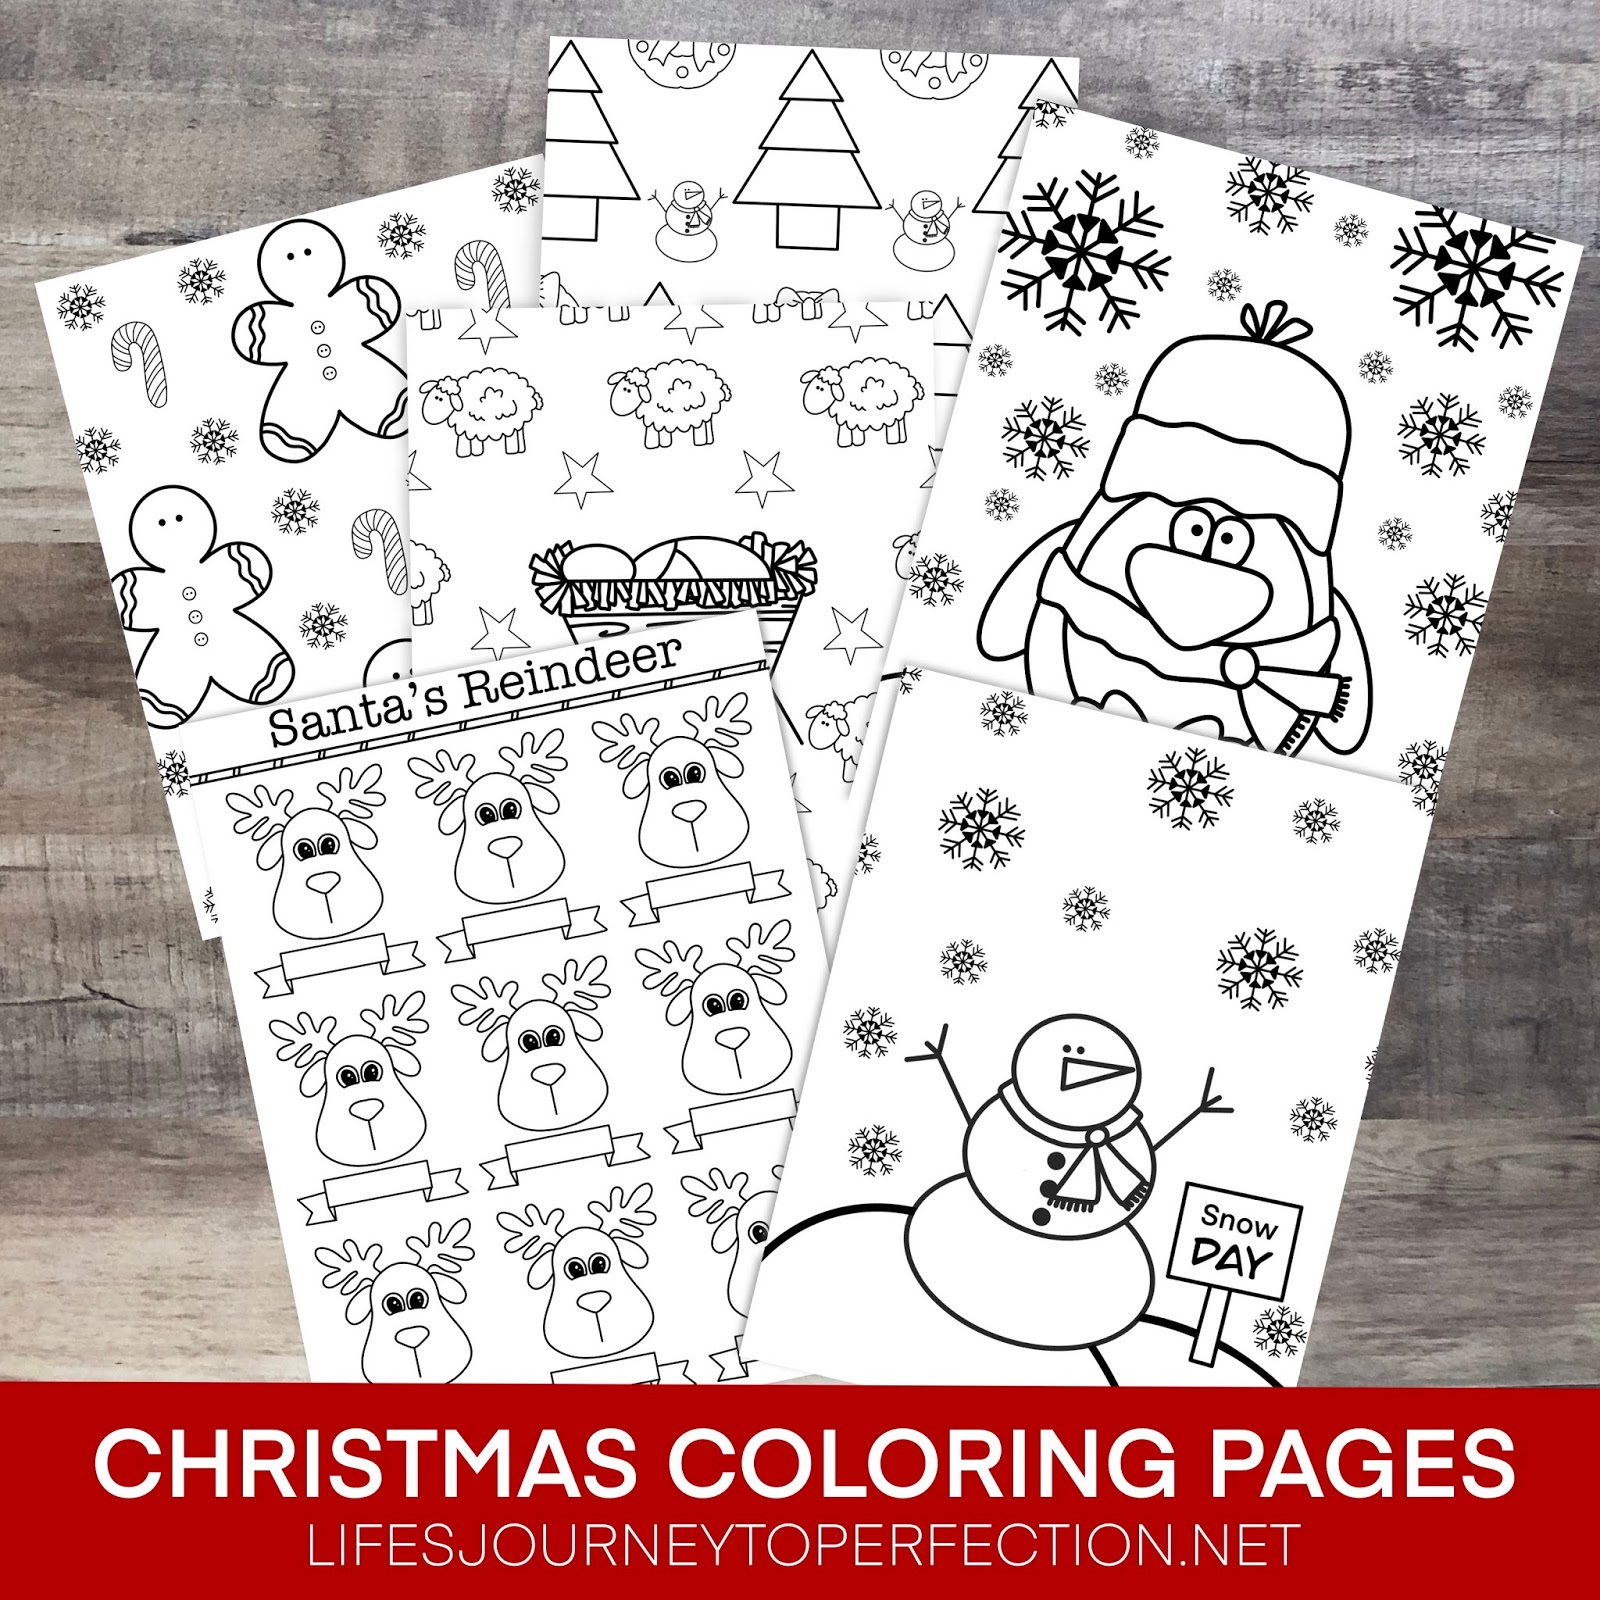 Life's Journey To Perfection Super Cute Christmas Coloring Pages ...